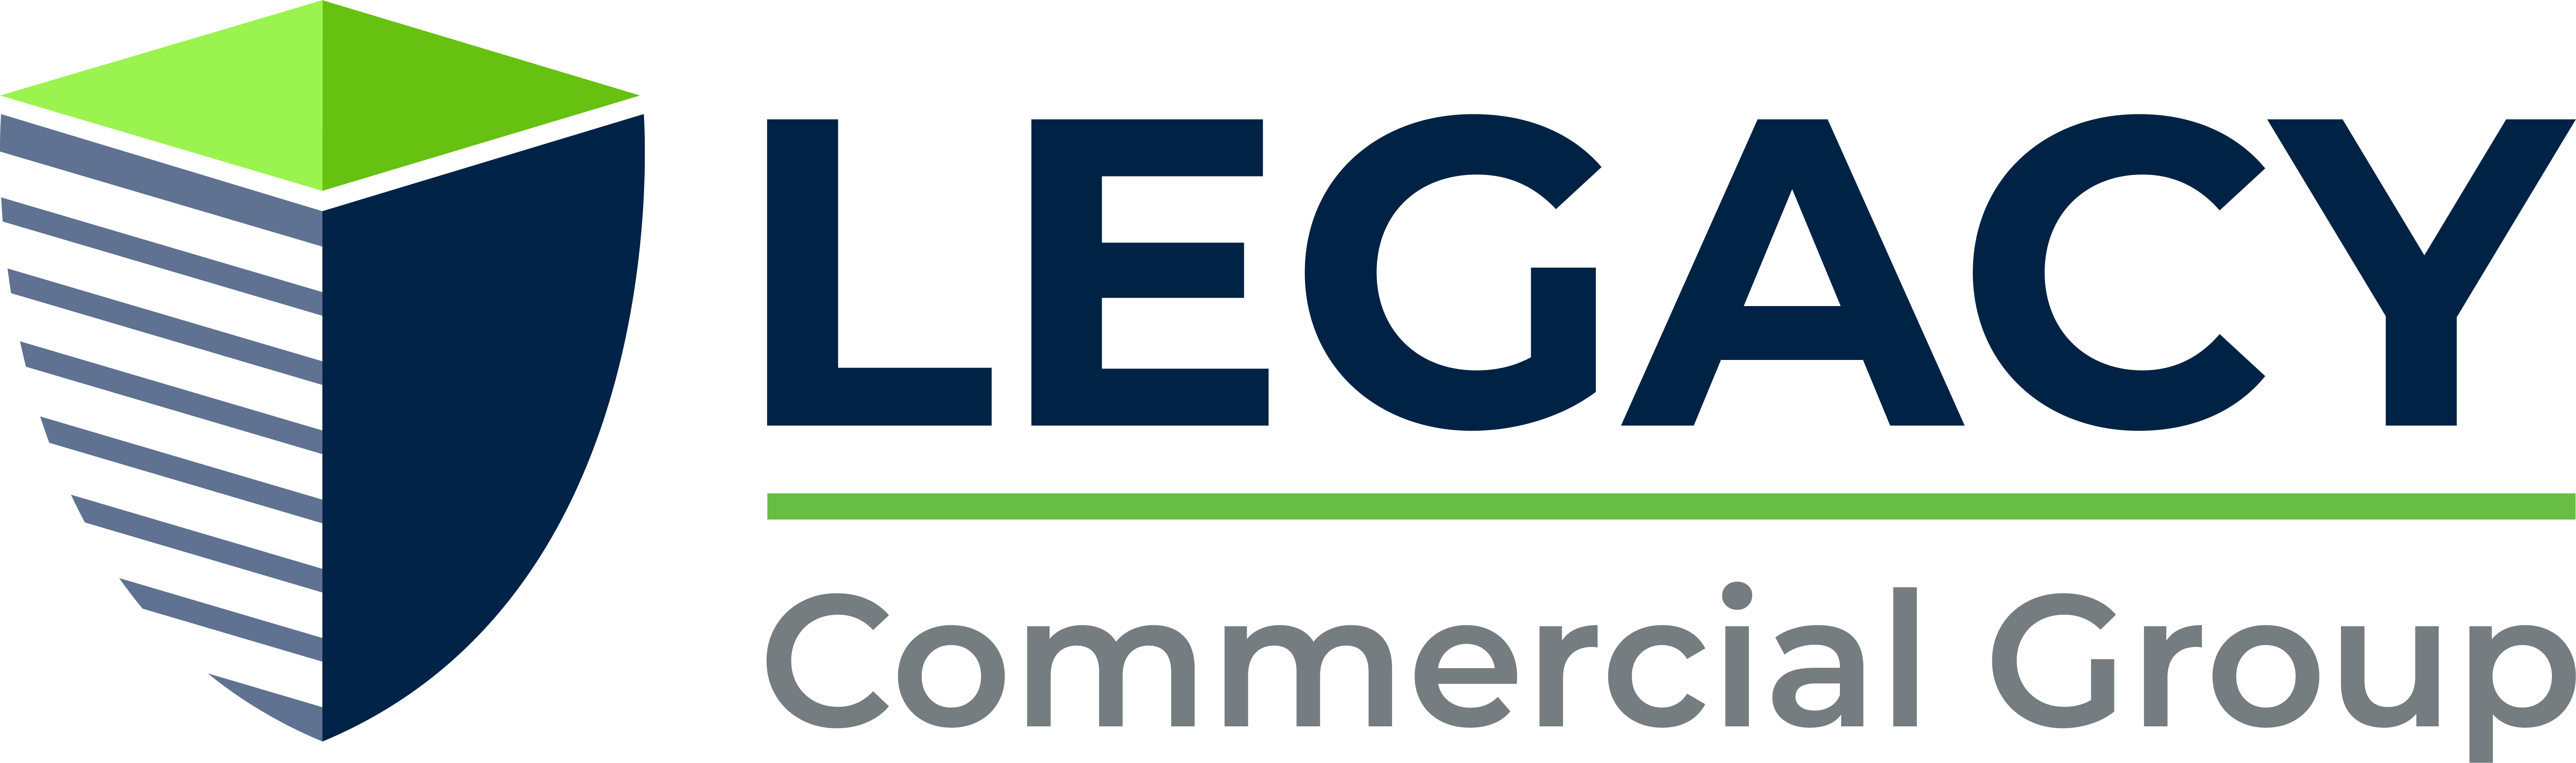 Legacy Commercial Group